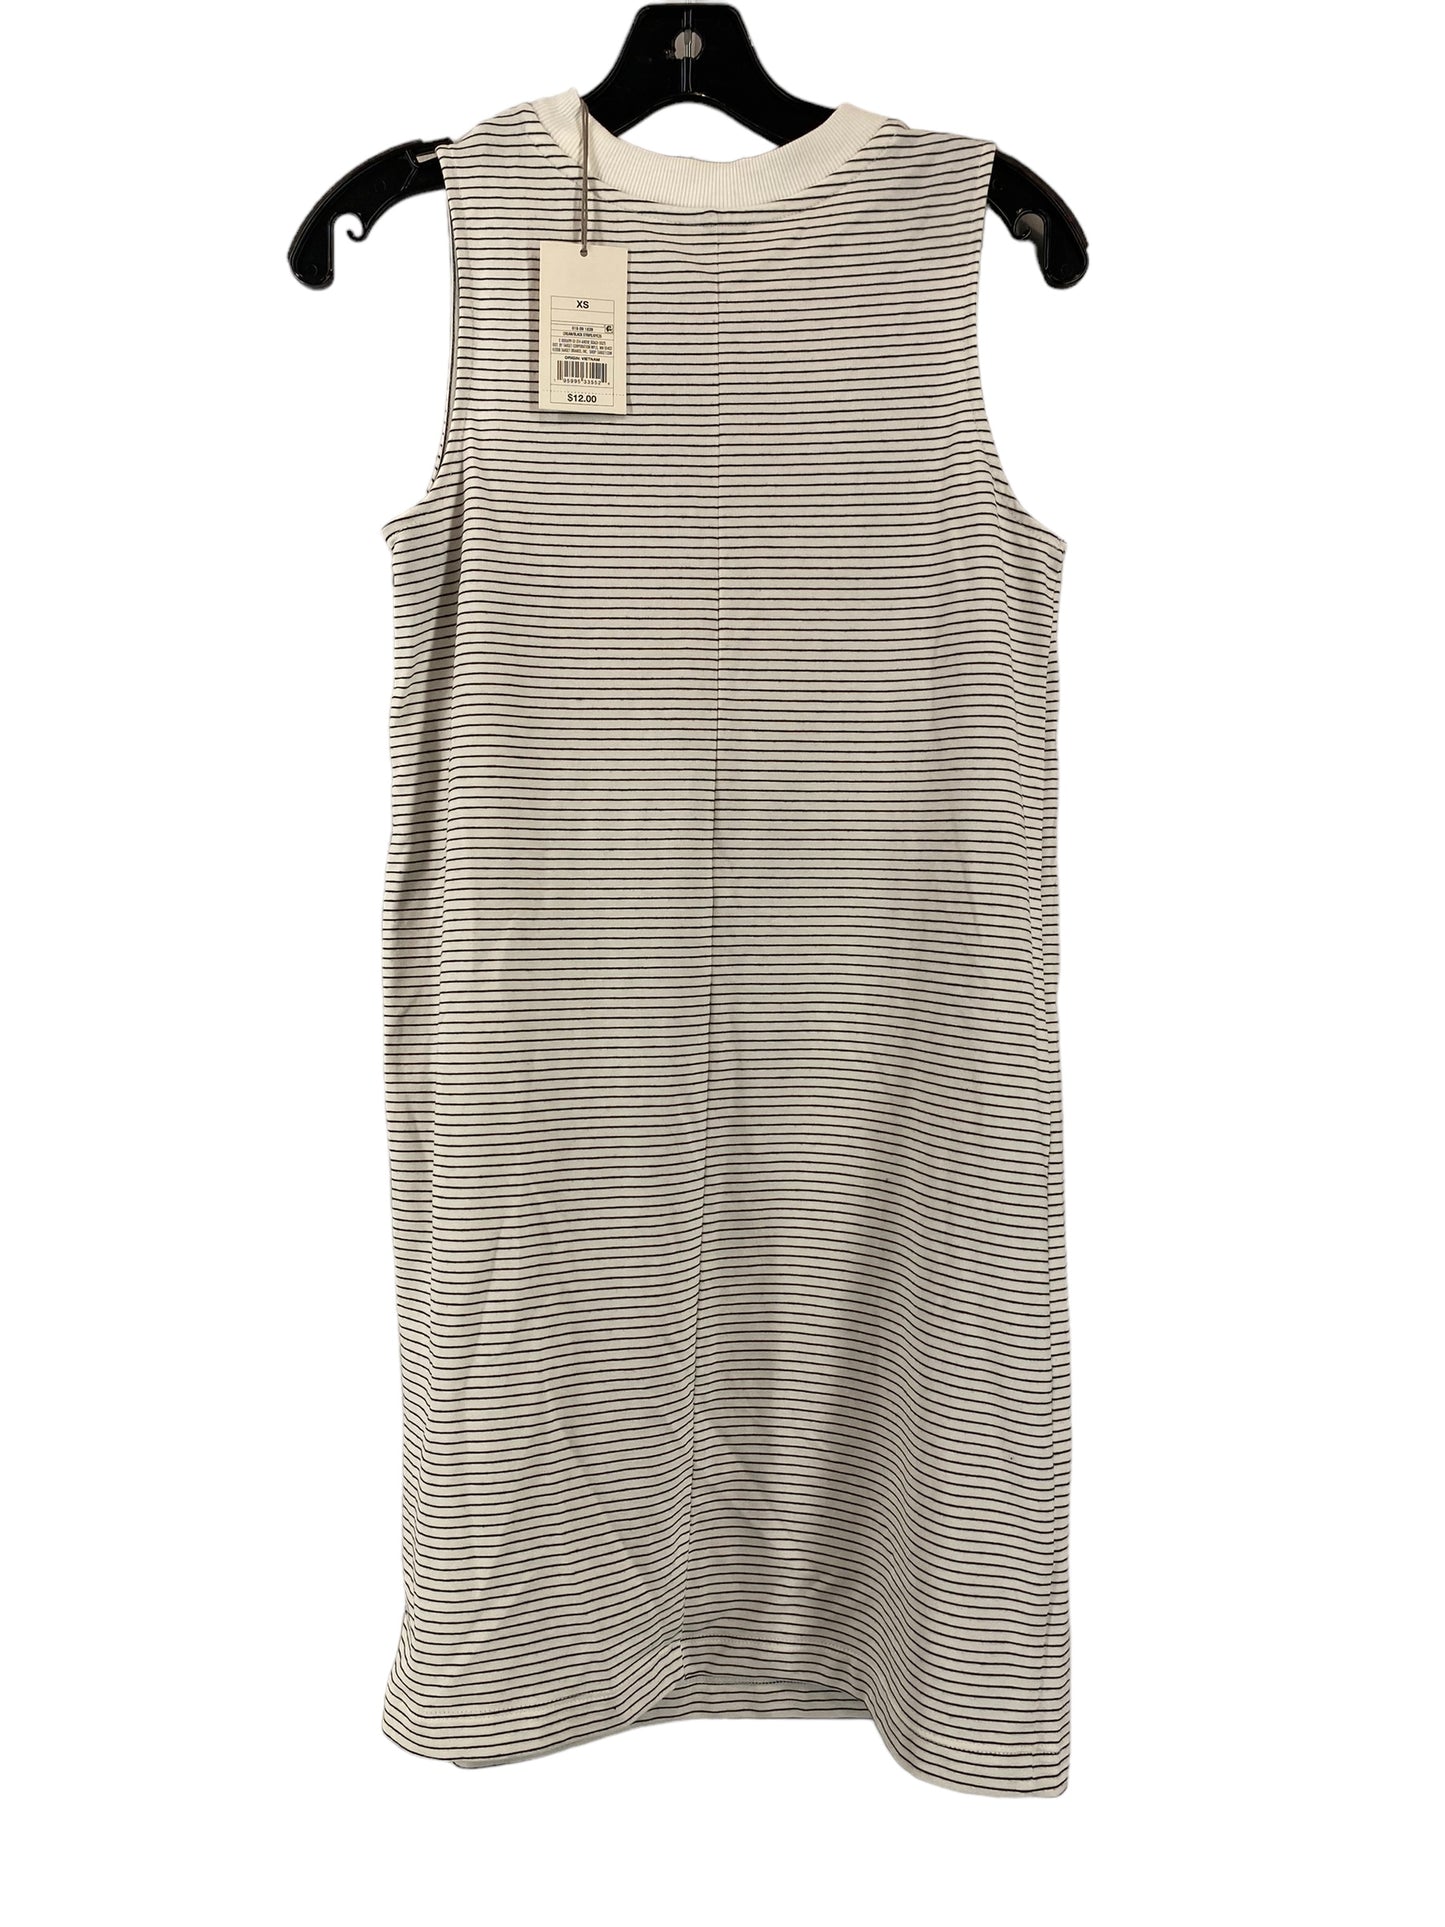 Dress Casual Midi By A New Day  Size: Xs